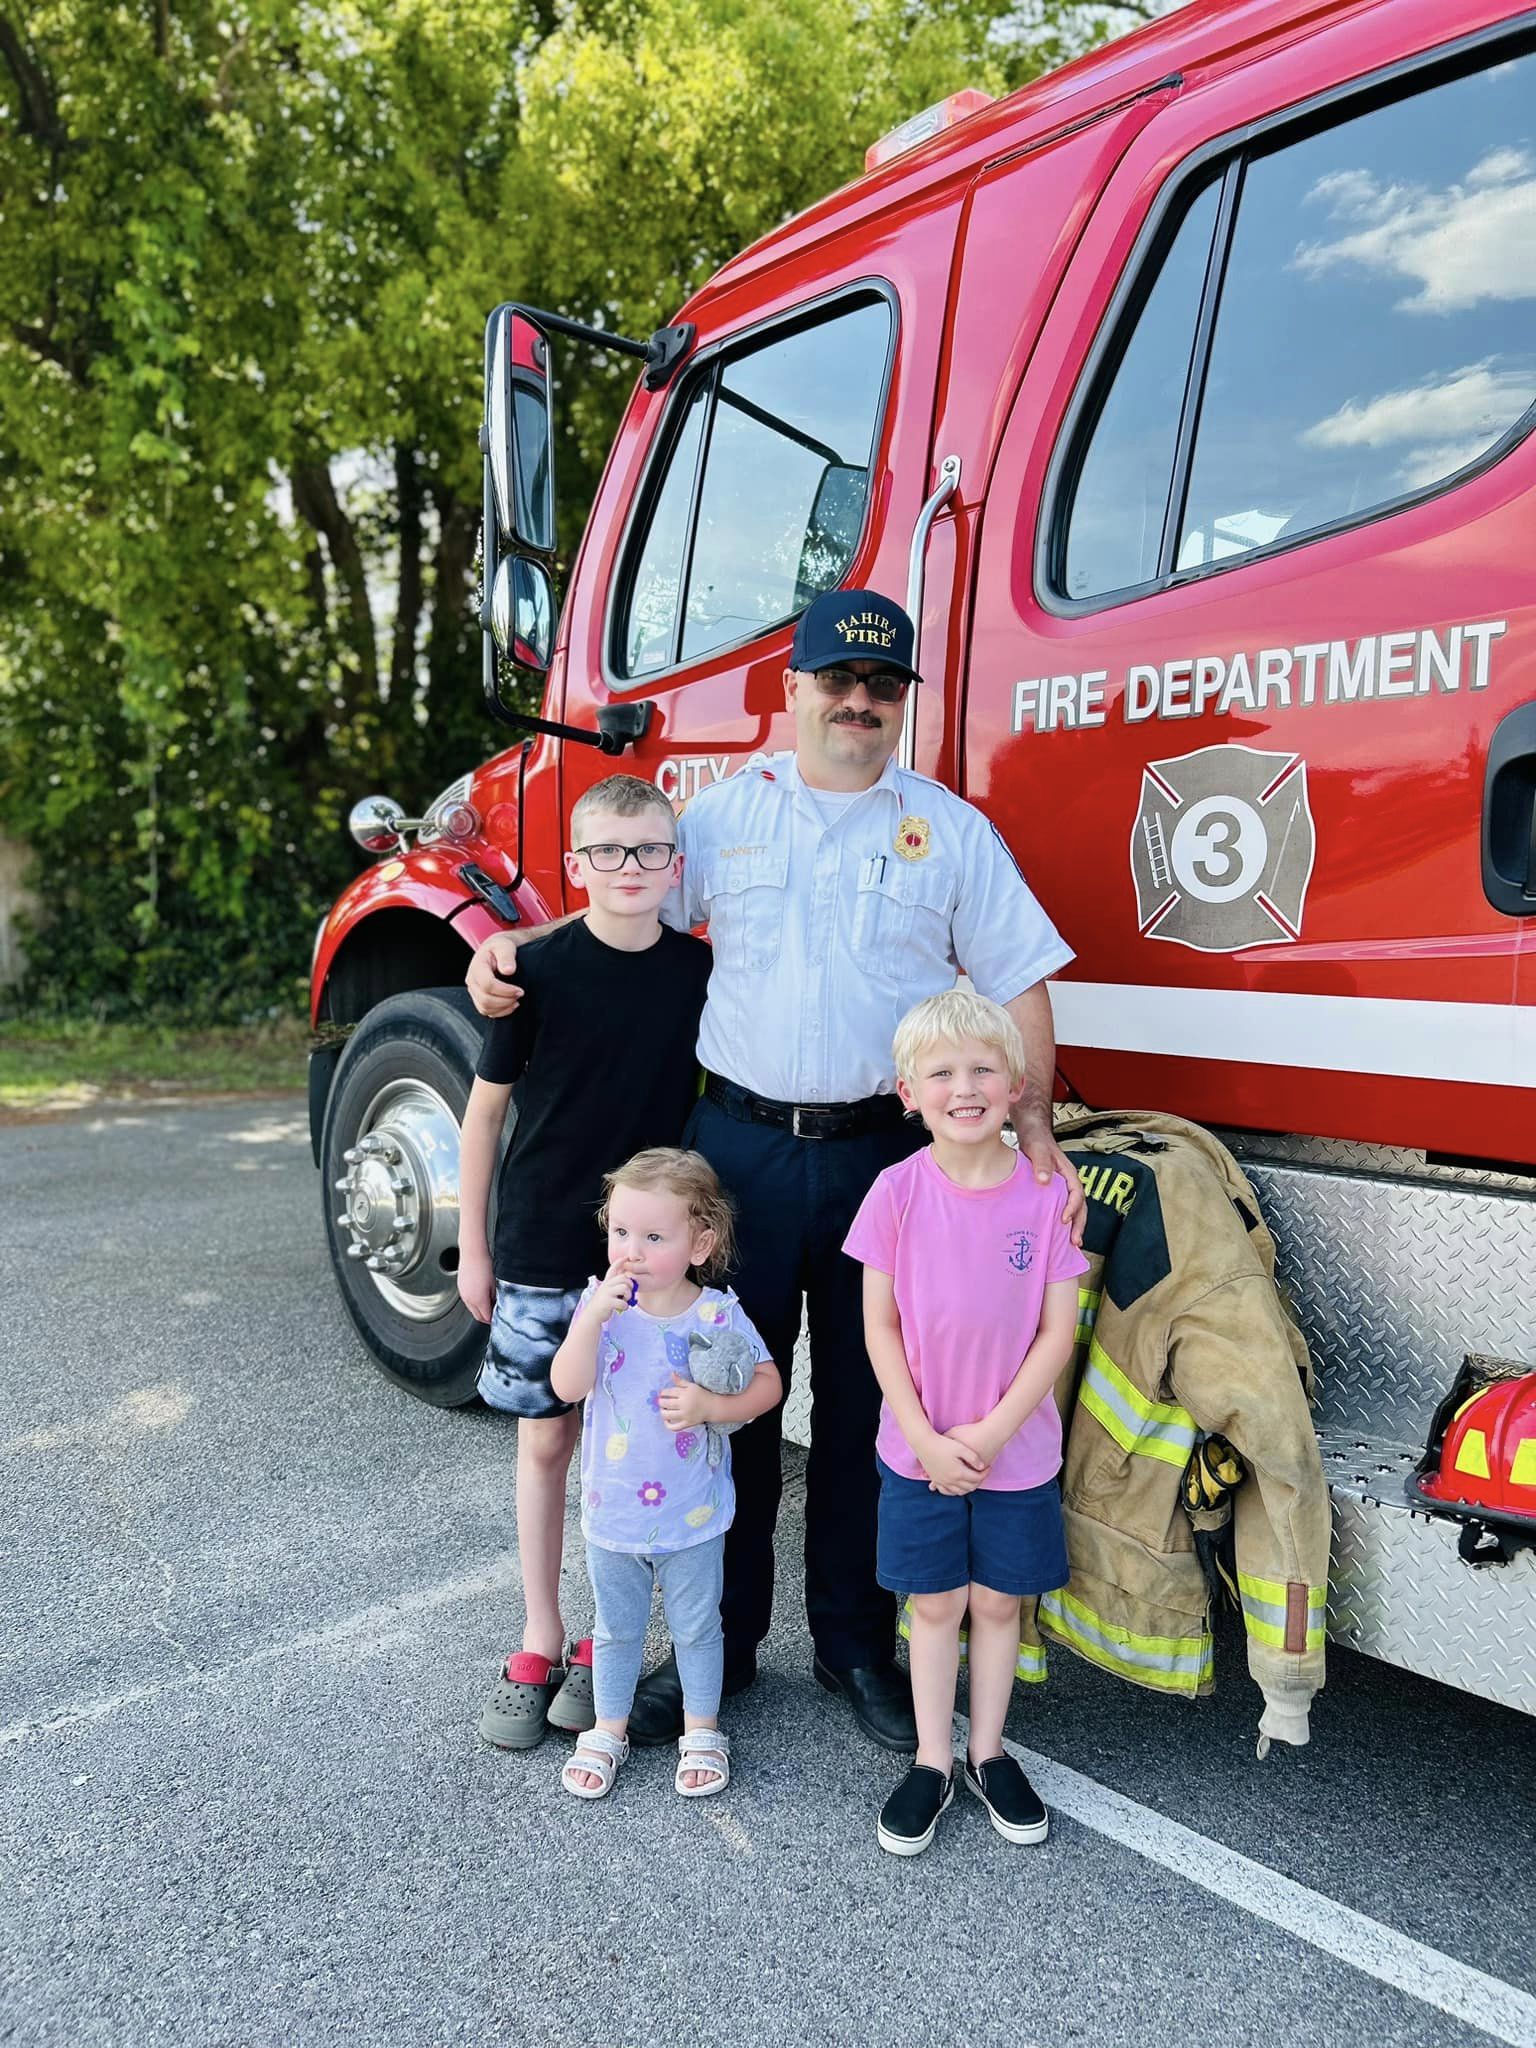 Fire Chief with local kids next to fire truck. 